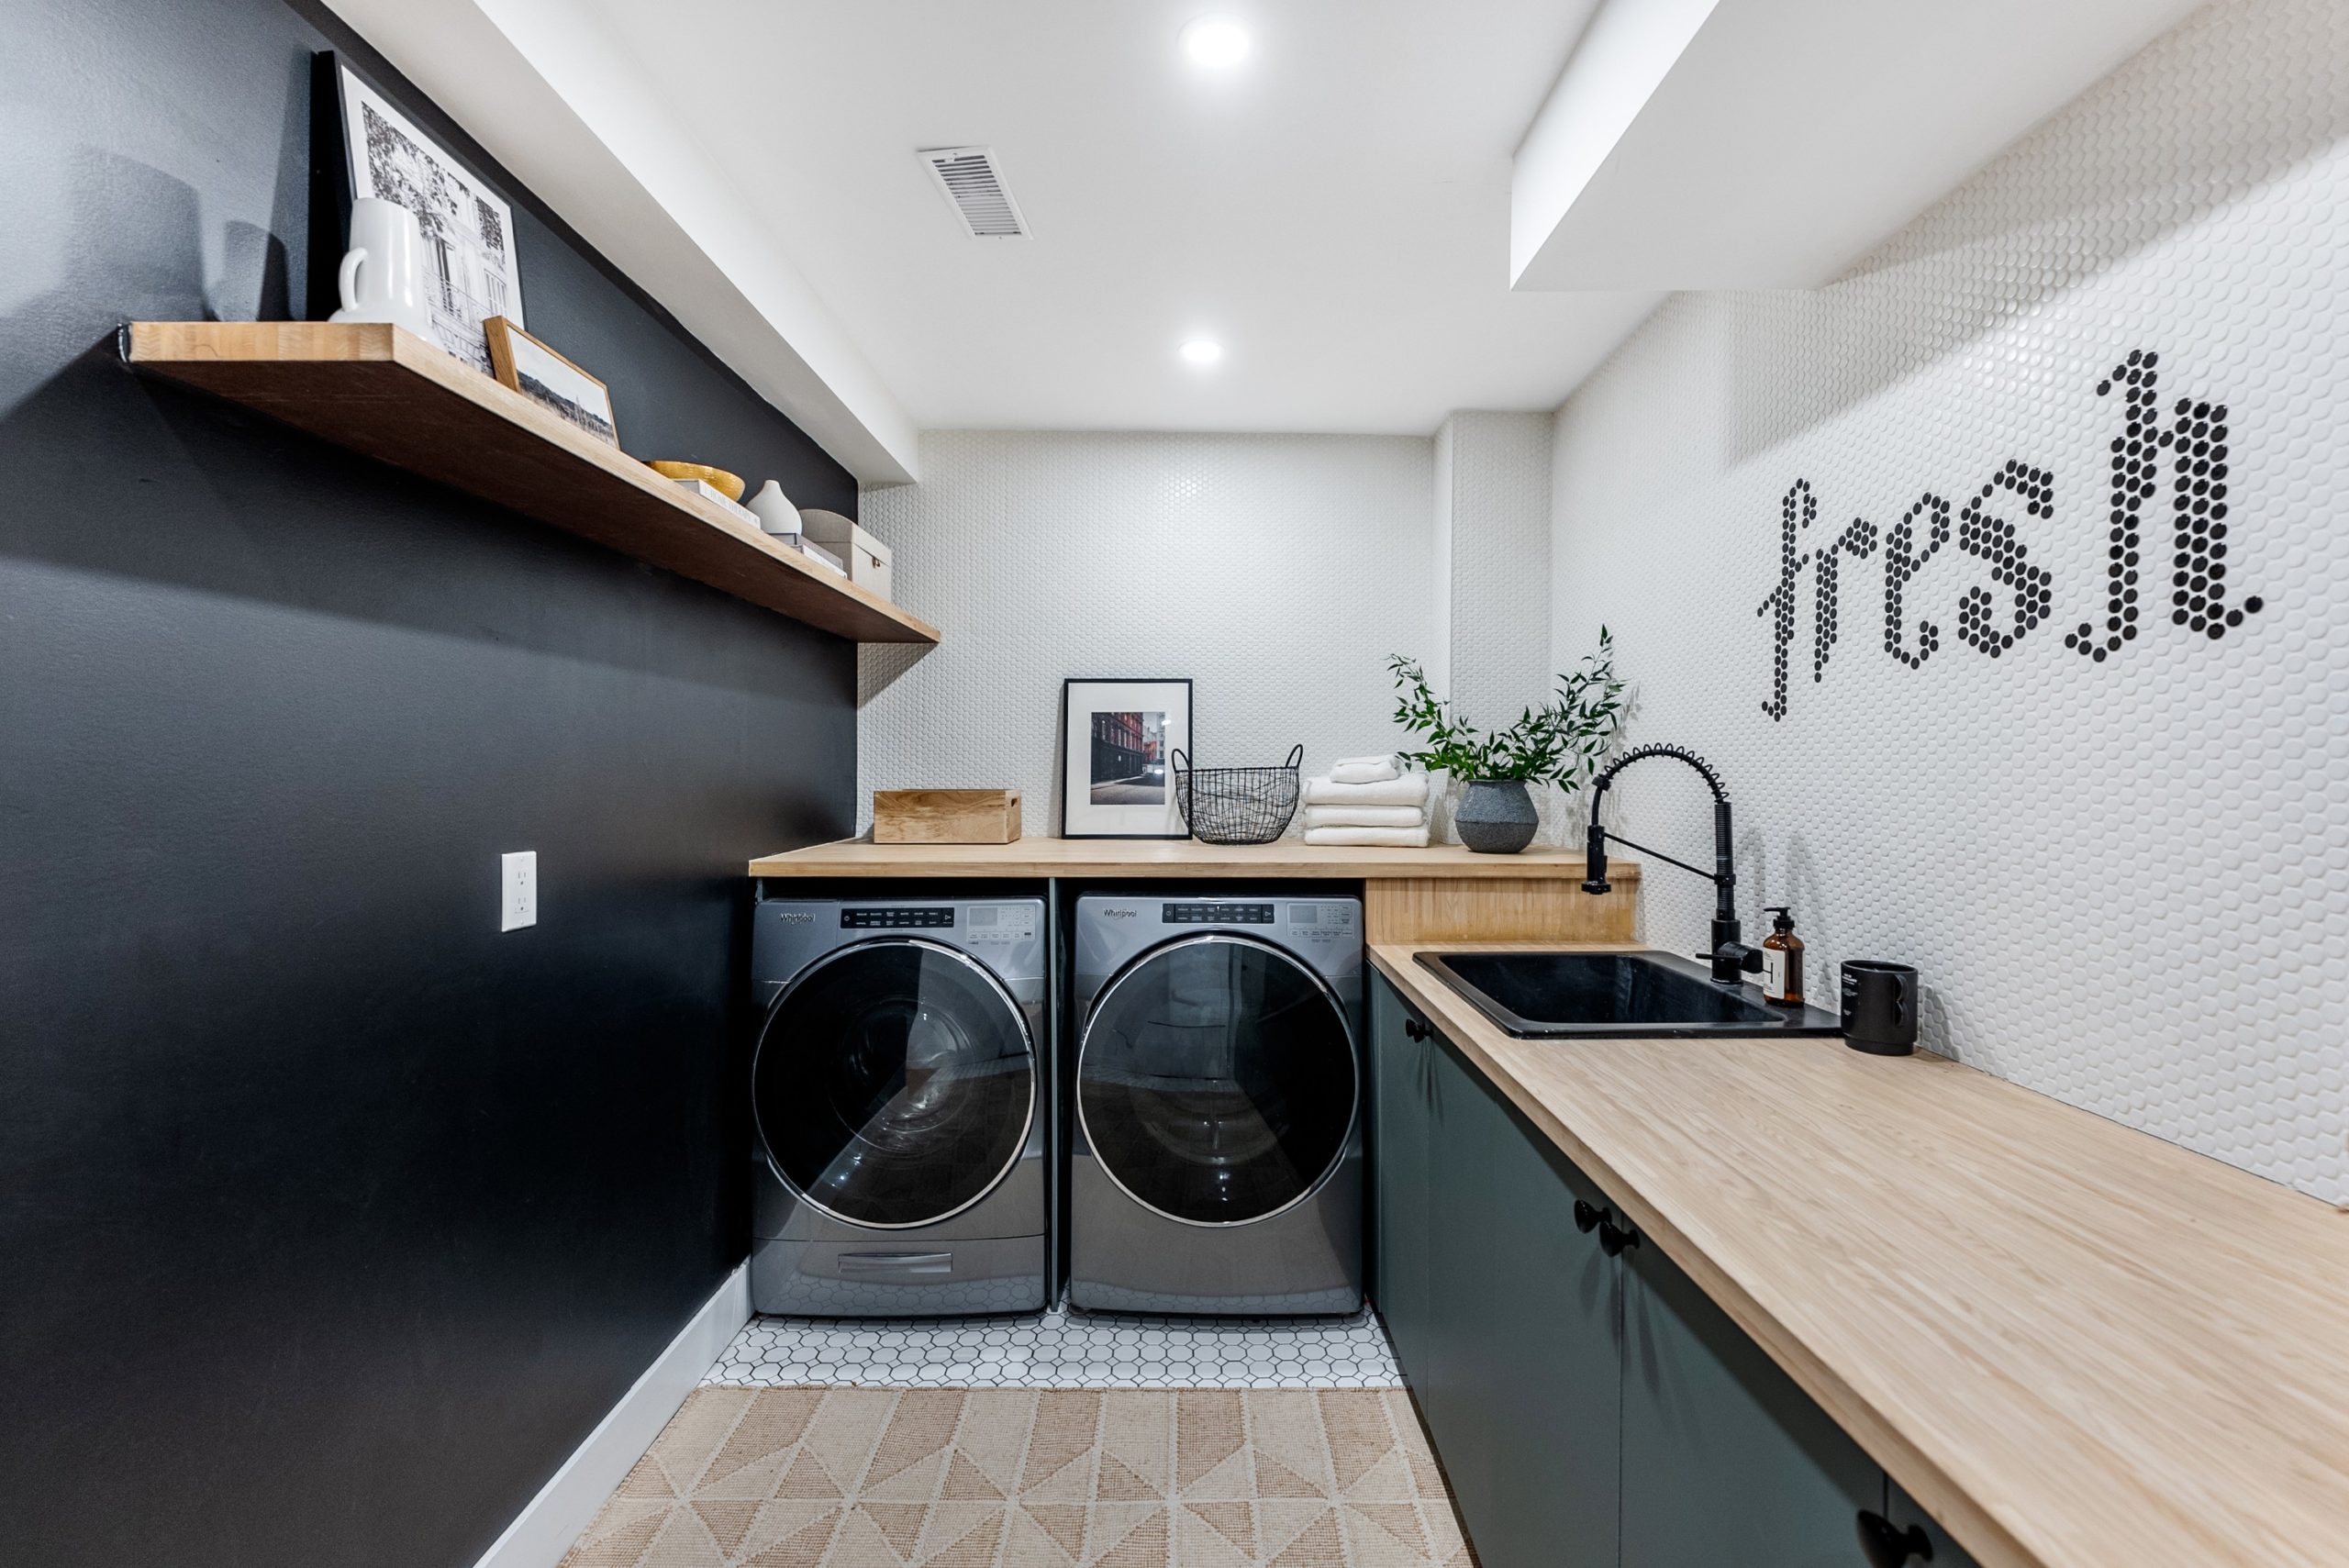 You won't find many laundry rooms more fun than this one. 